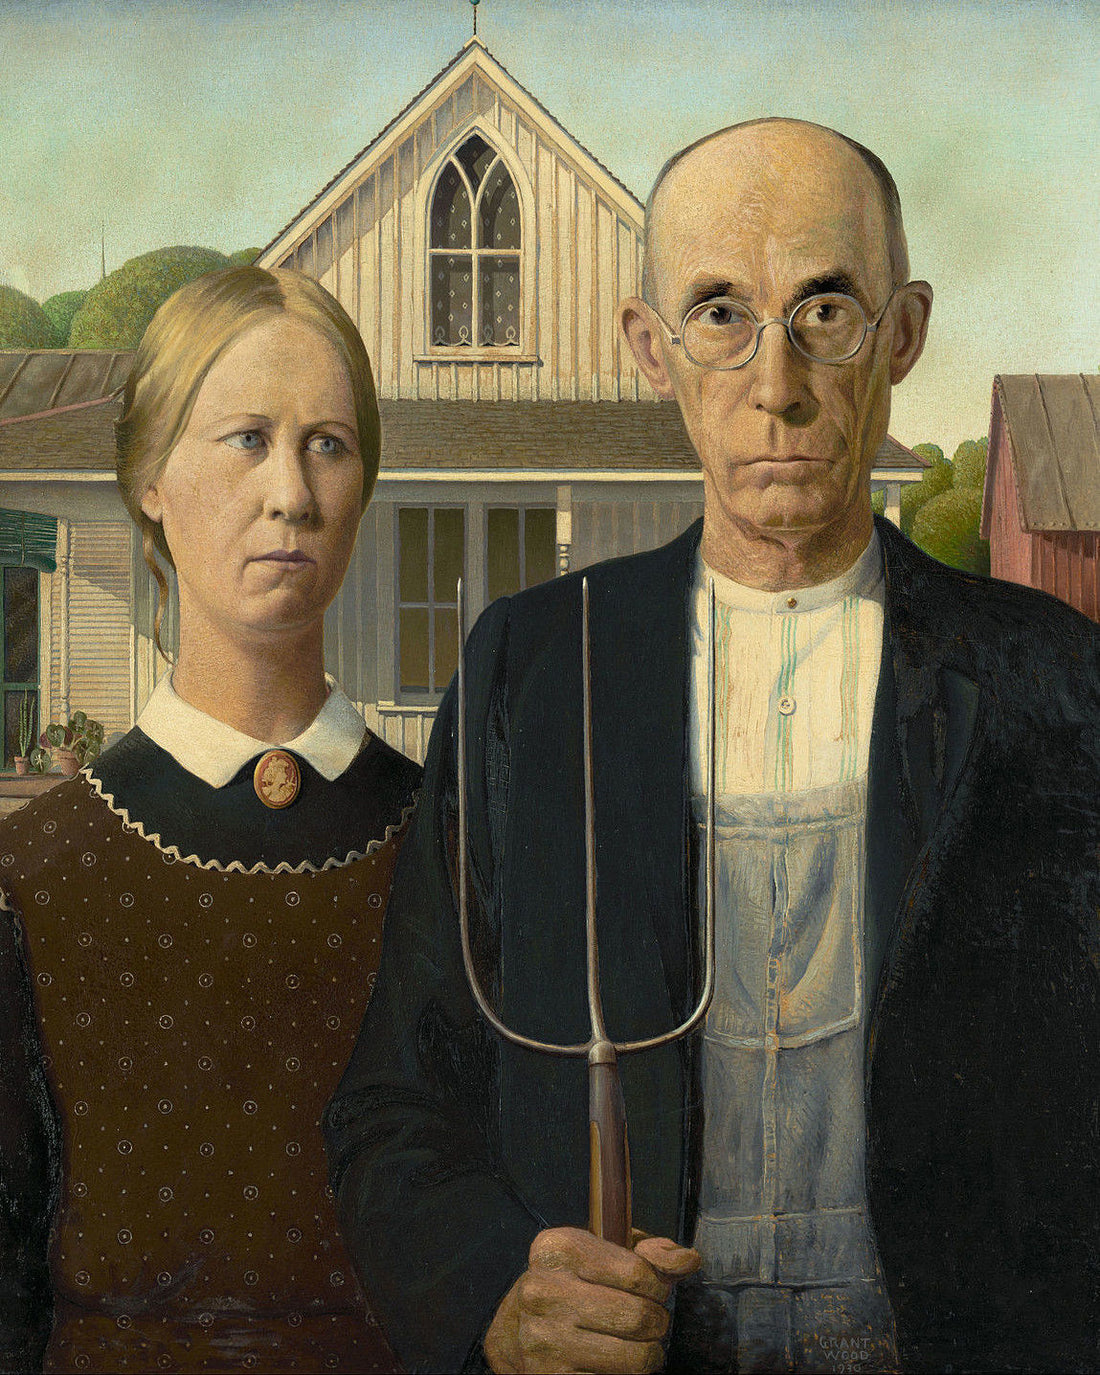 Comparing the Sizes for a Couples Portrait: Using Grant Wood's American Gothic